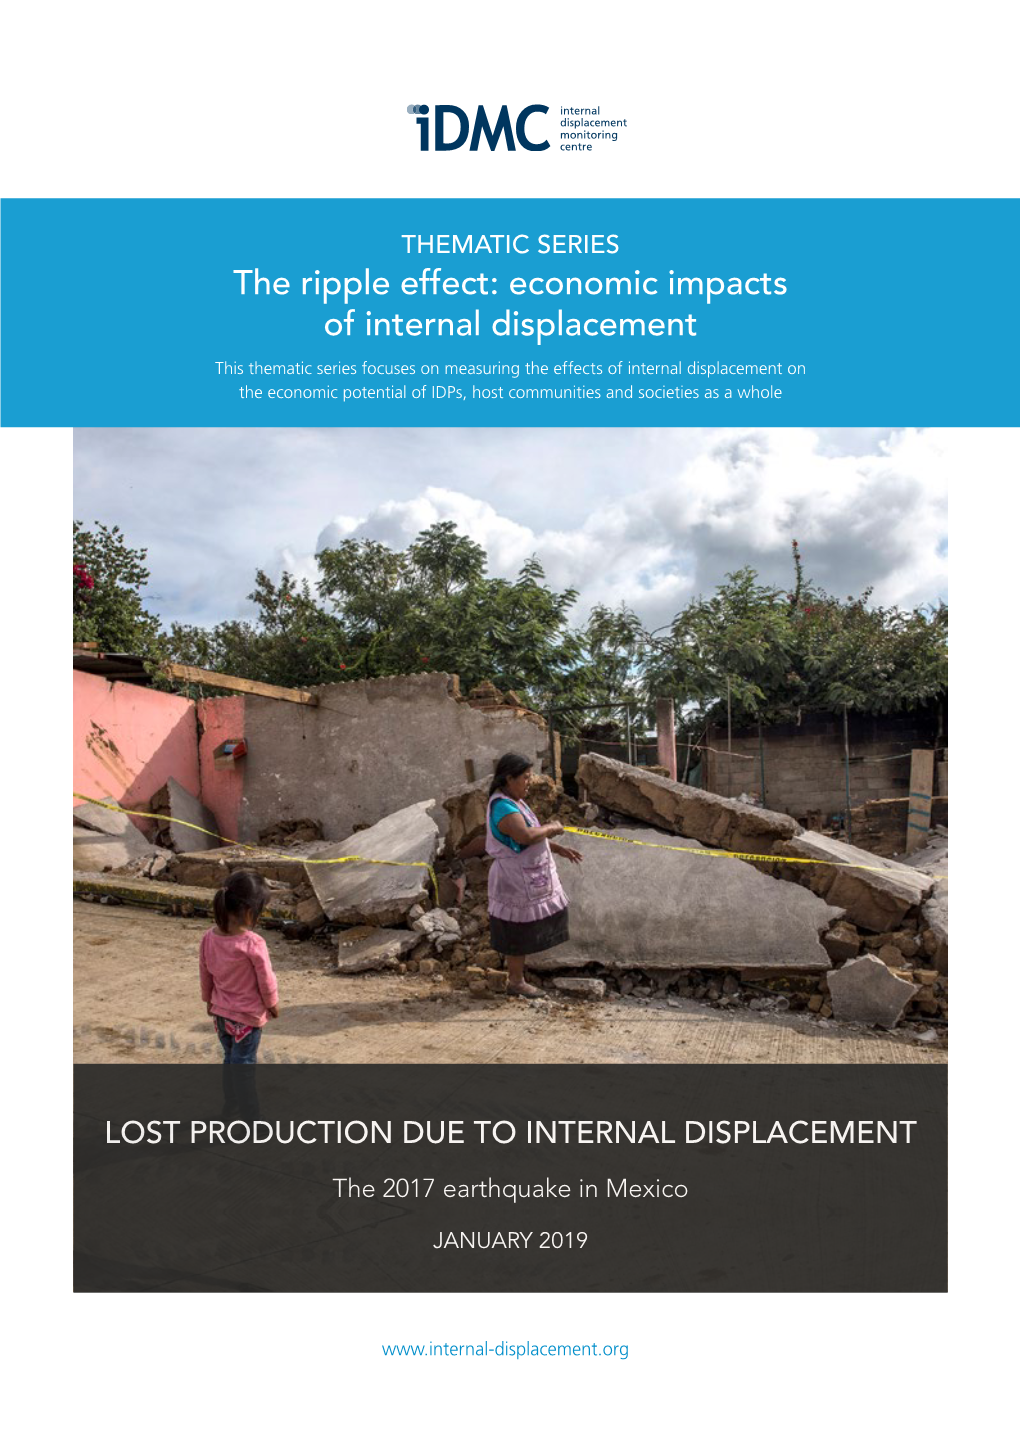 The Ripple Effect: Economic Impacts of Internal Displacement